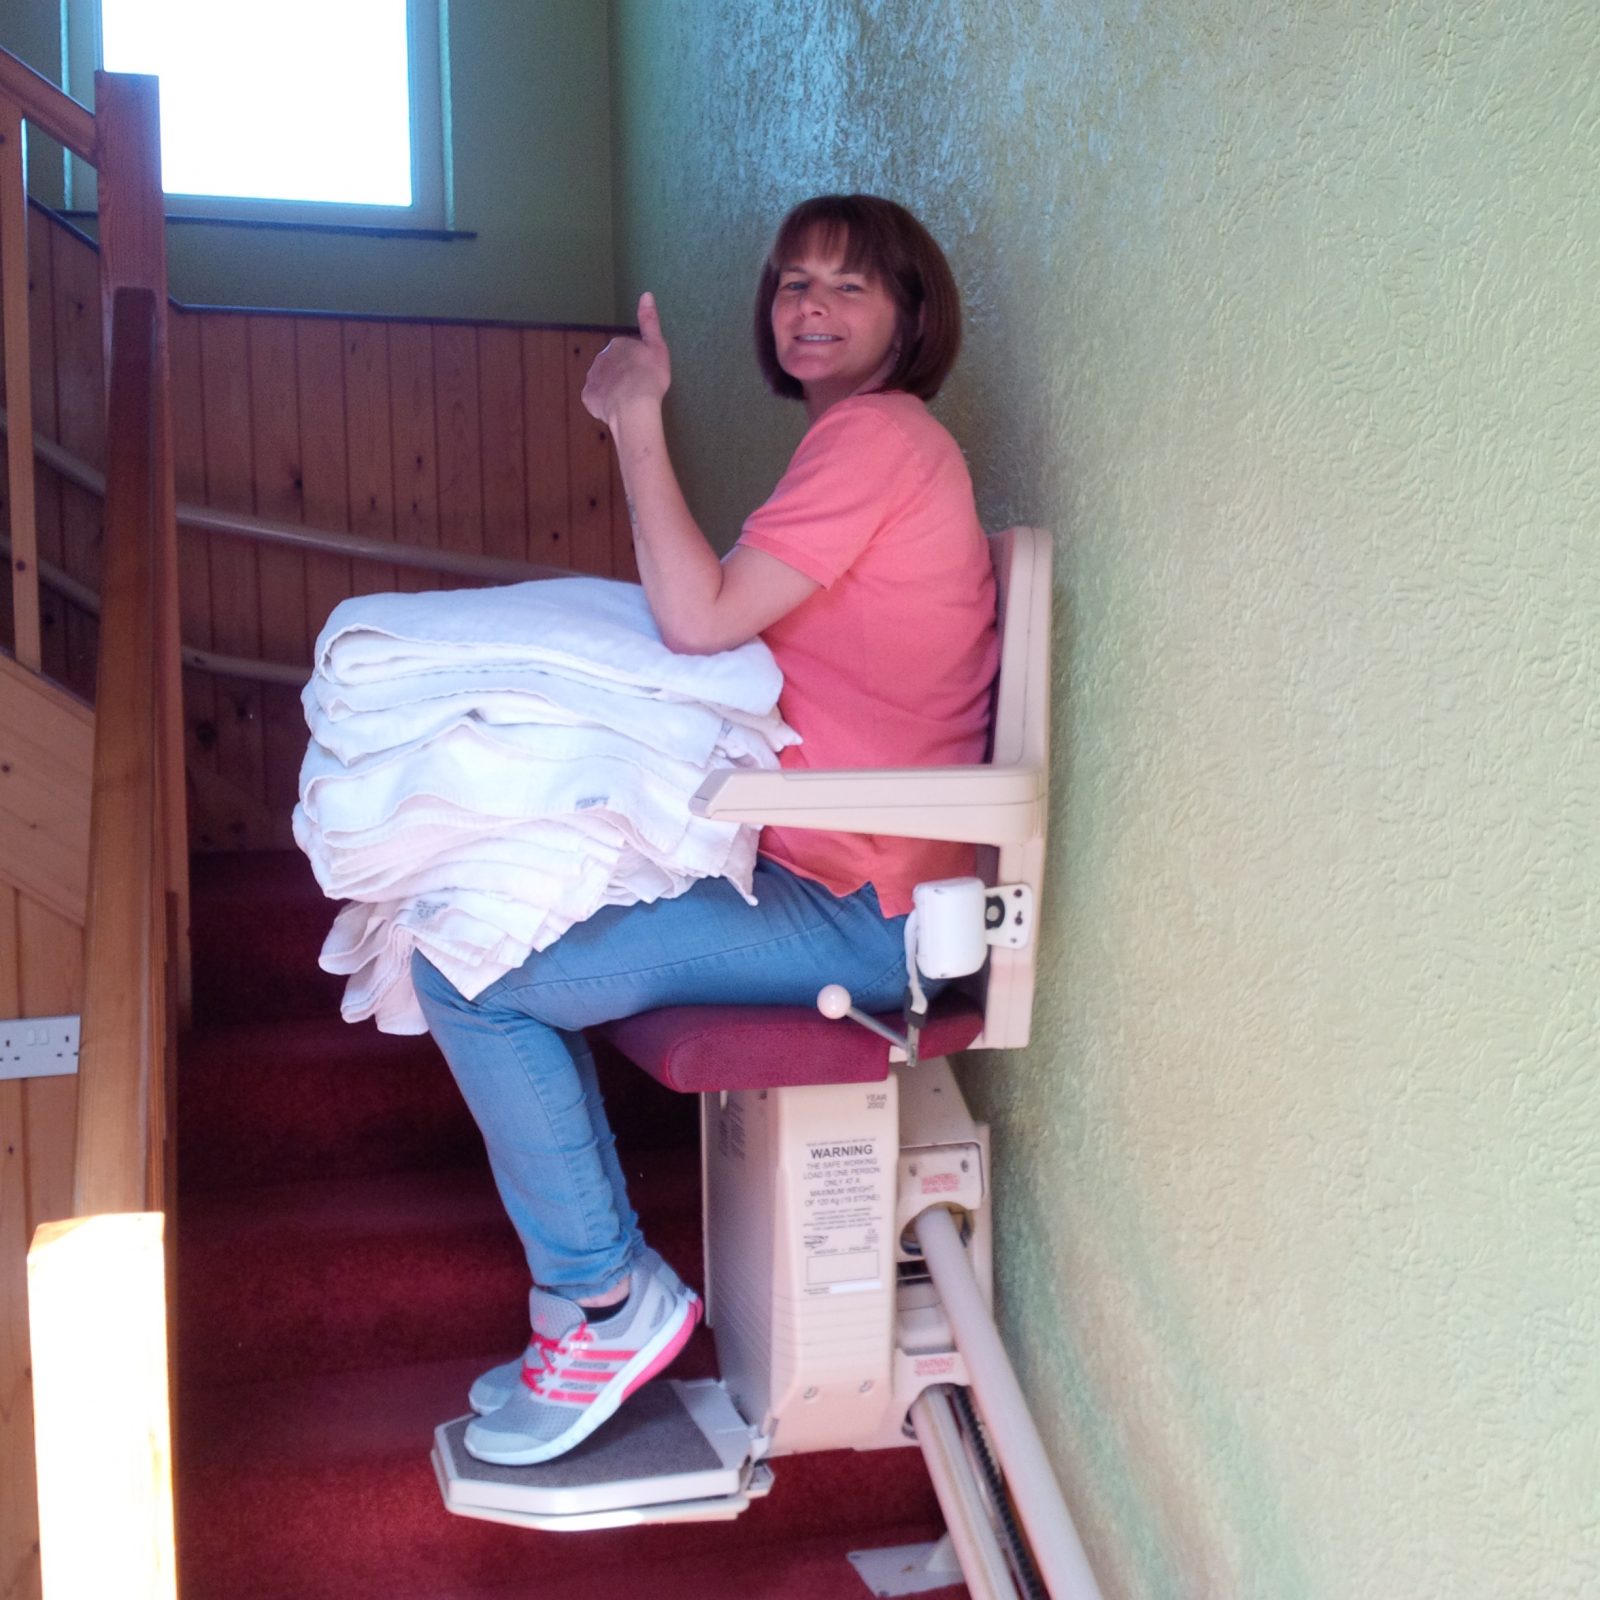 A cleaner carries bedding and towels on the stairlift in apartment 2